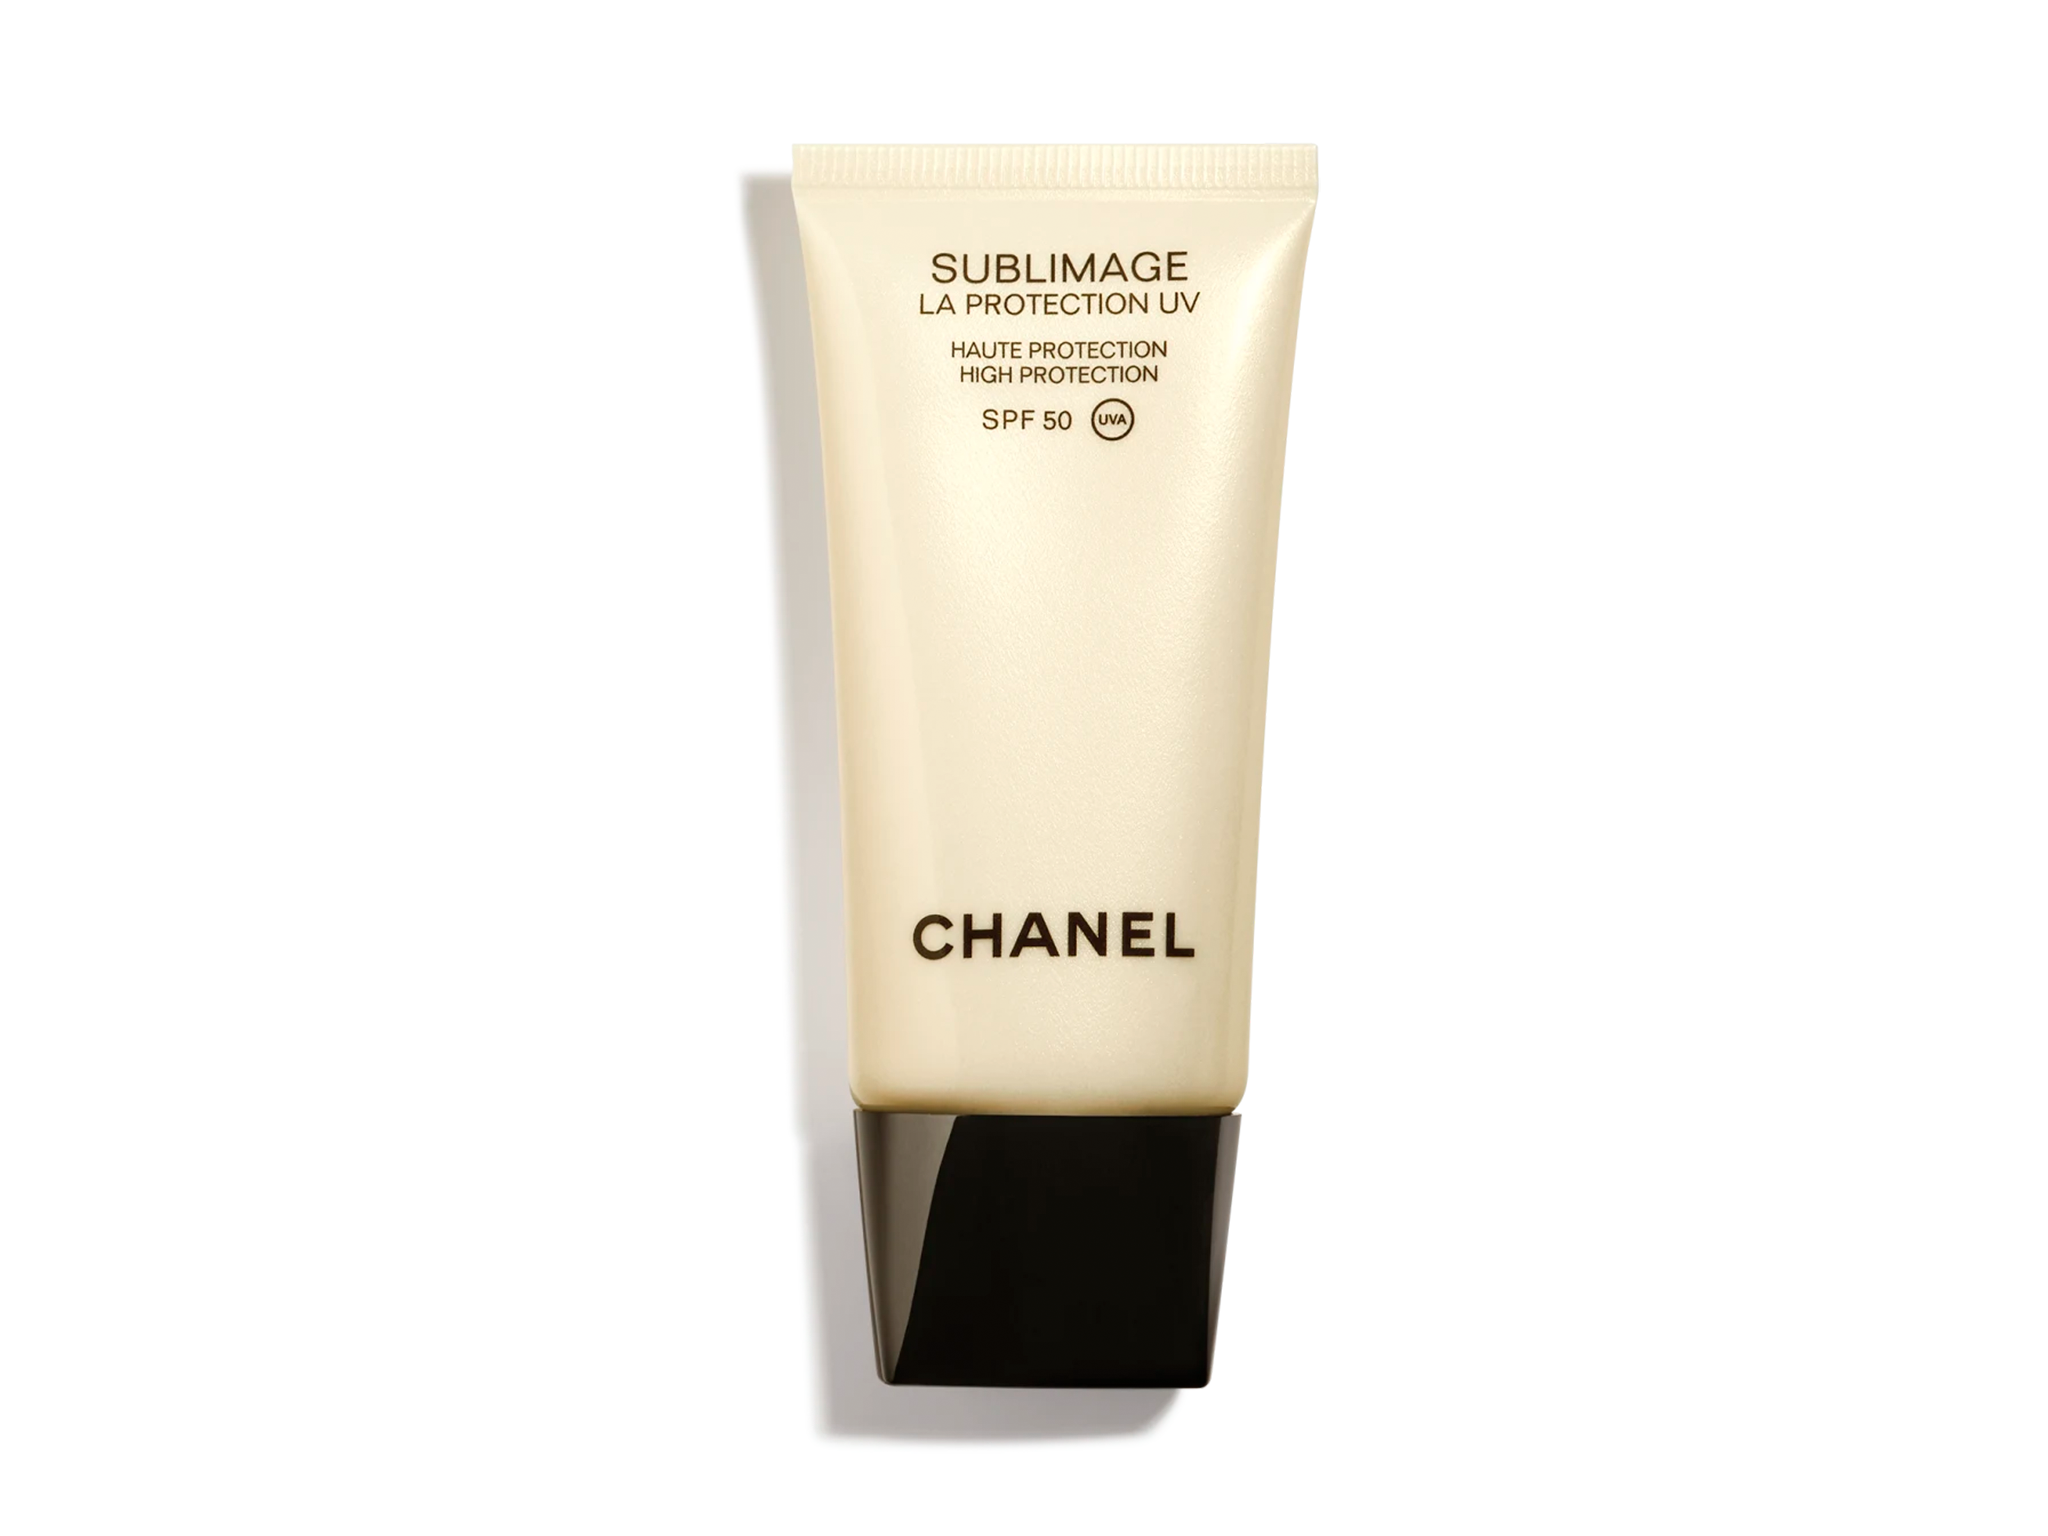 Review: Chanel Sublimage La Protection UV SPF 50 Sunscreen